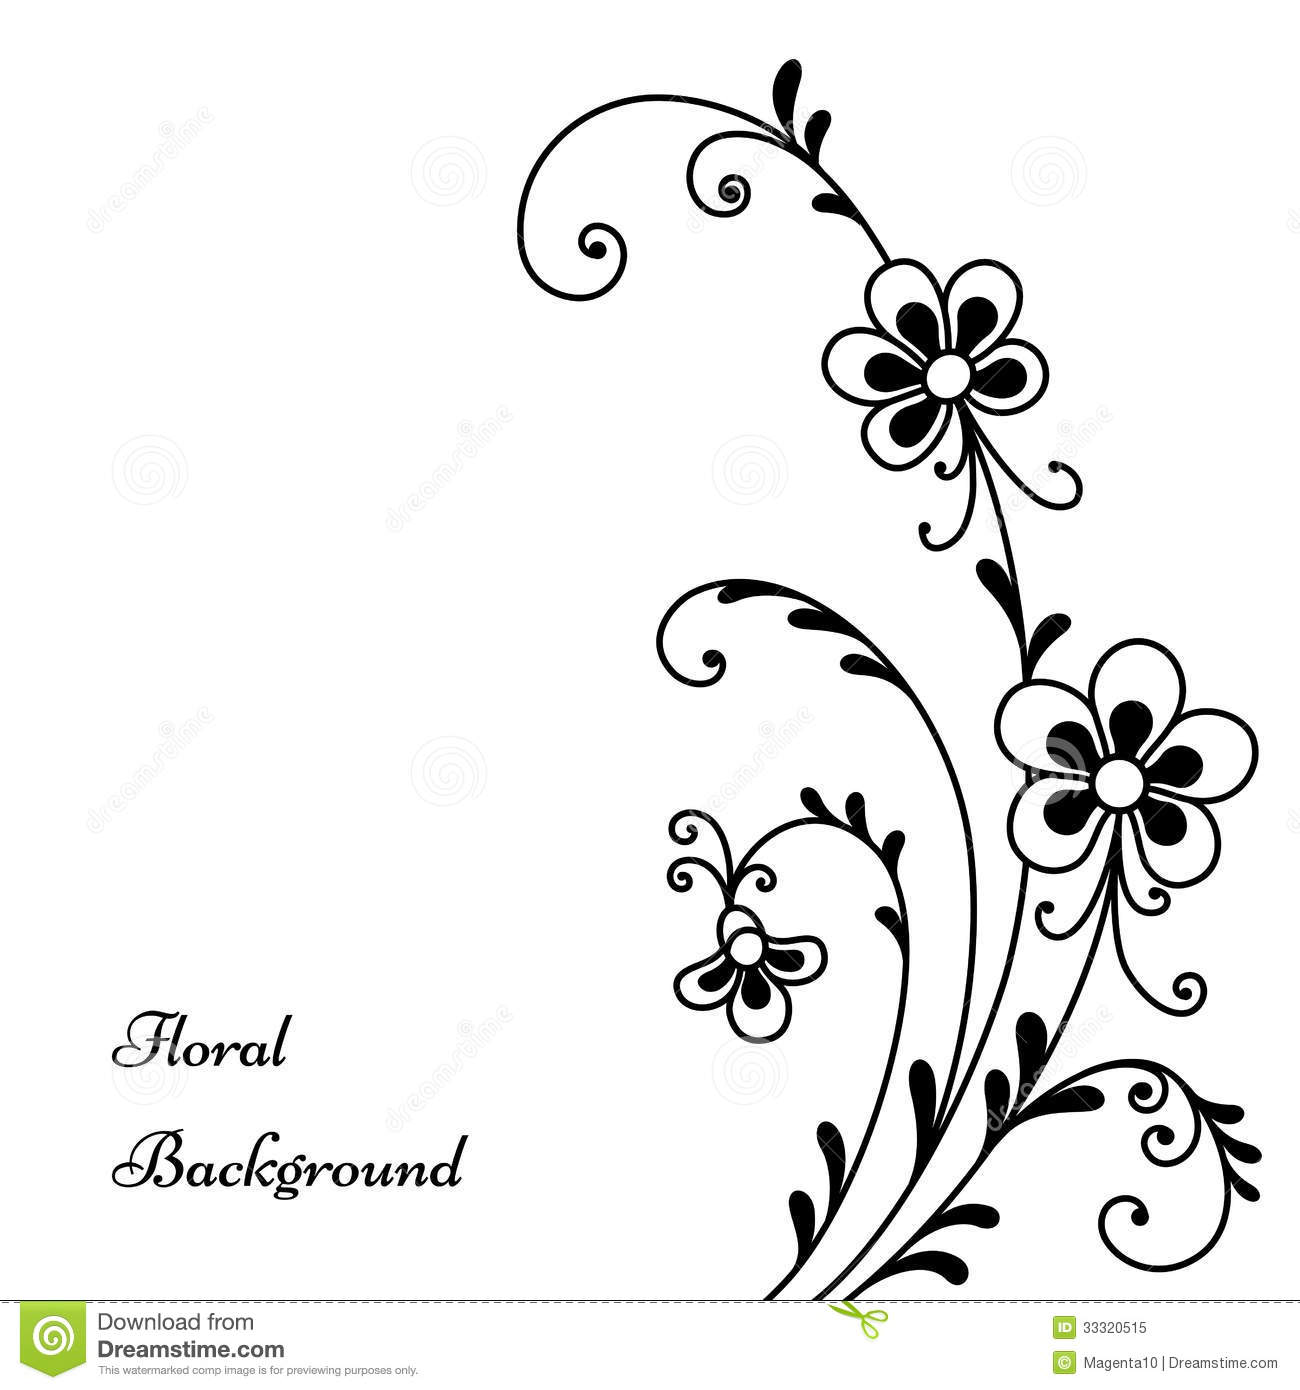 Black and White Simple Flower Designs